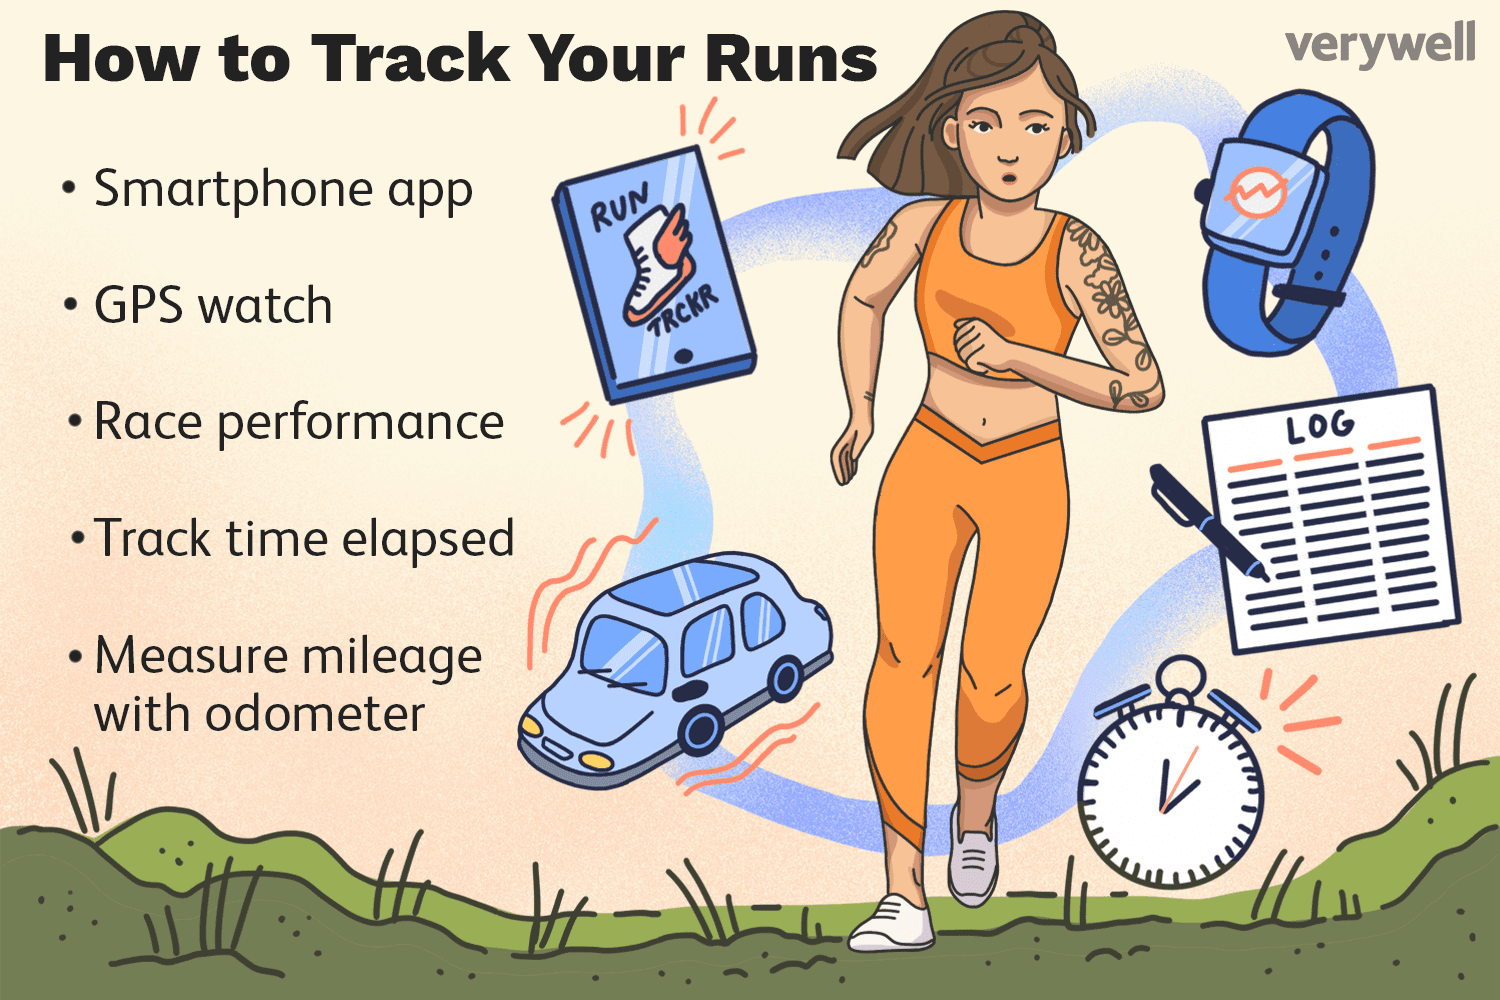 How to Track Your Runs- illustration by Madelyn Goodnight